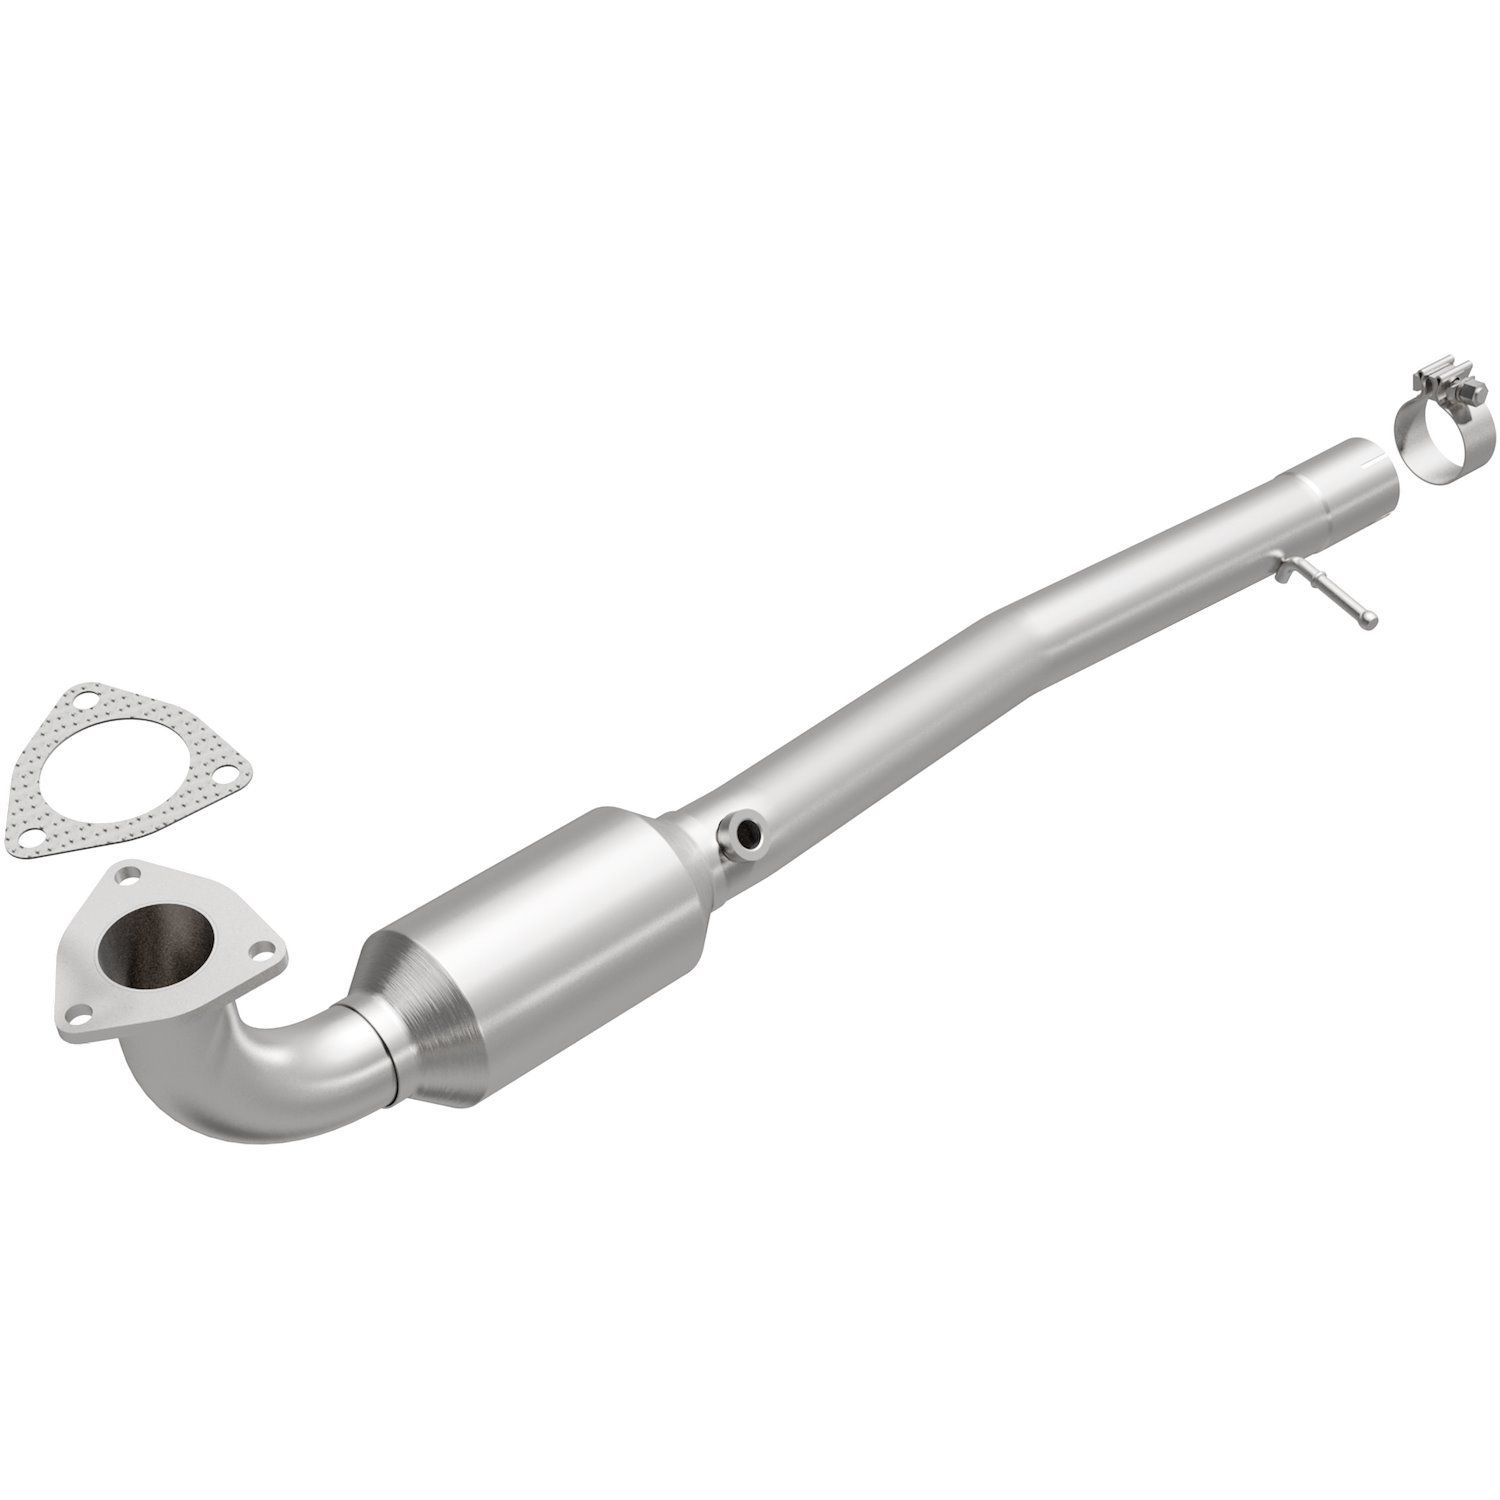 2010-2012 Land Rover Range Rover California Grade CARB Compliant Direct-Fit Catalytic Converter